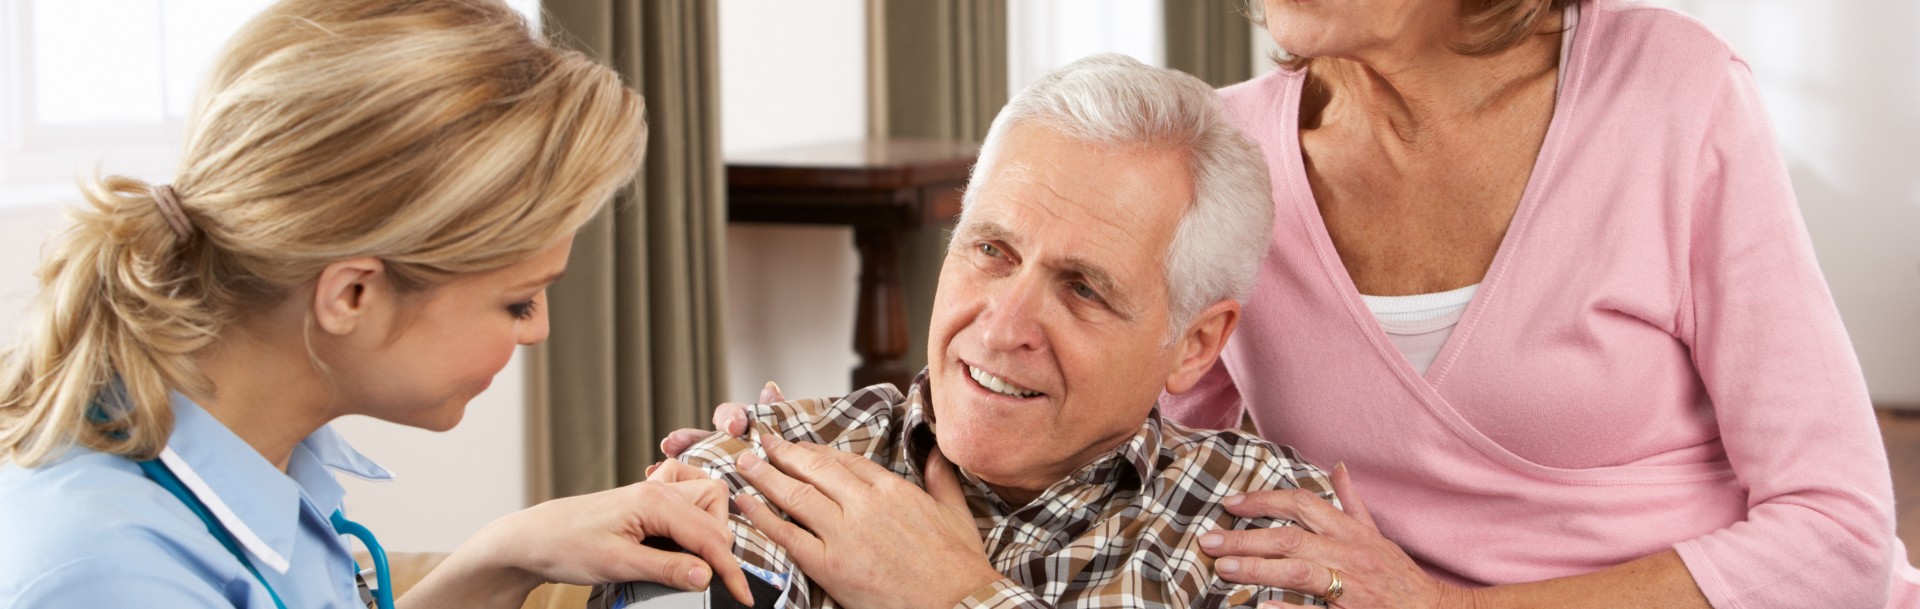 senior man looking at her young caregiver